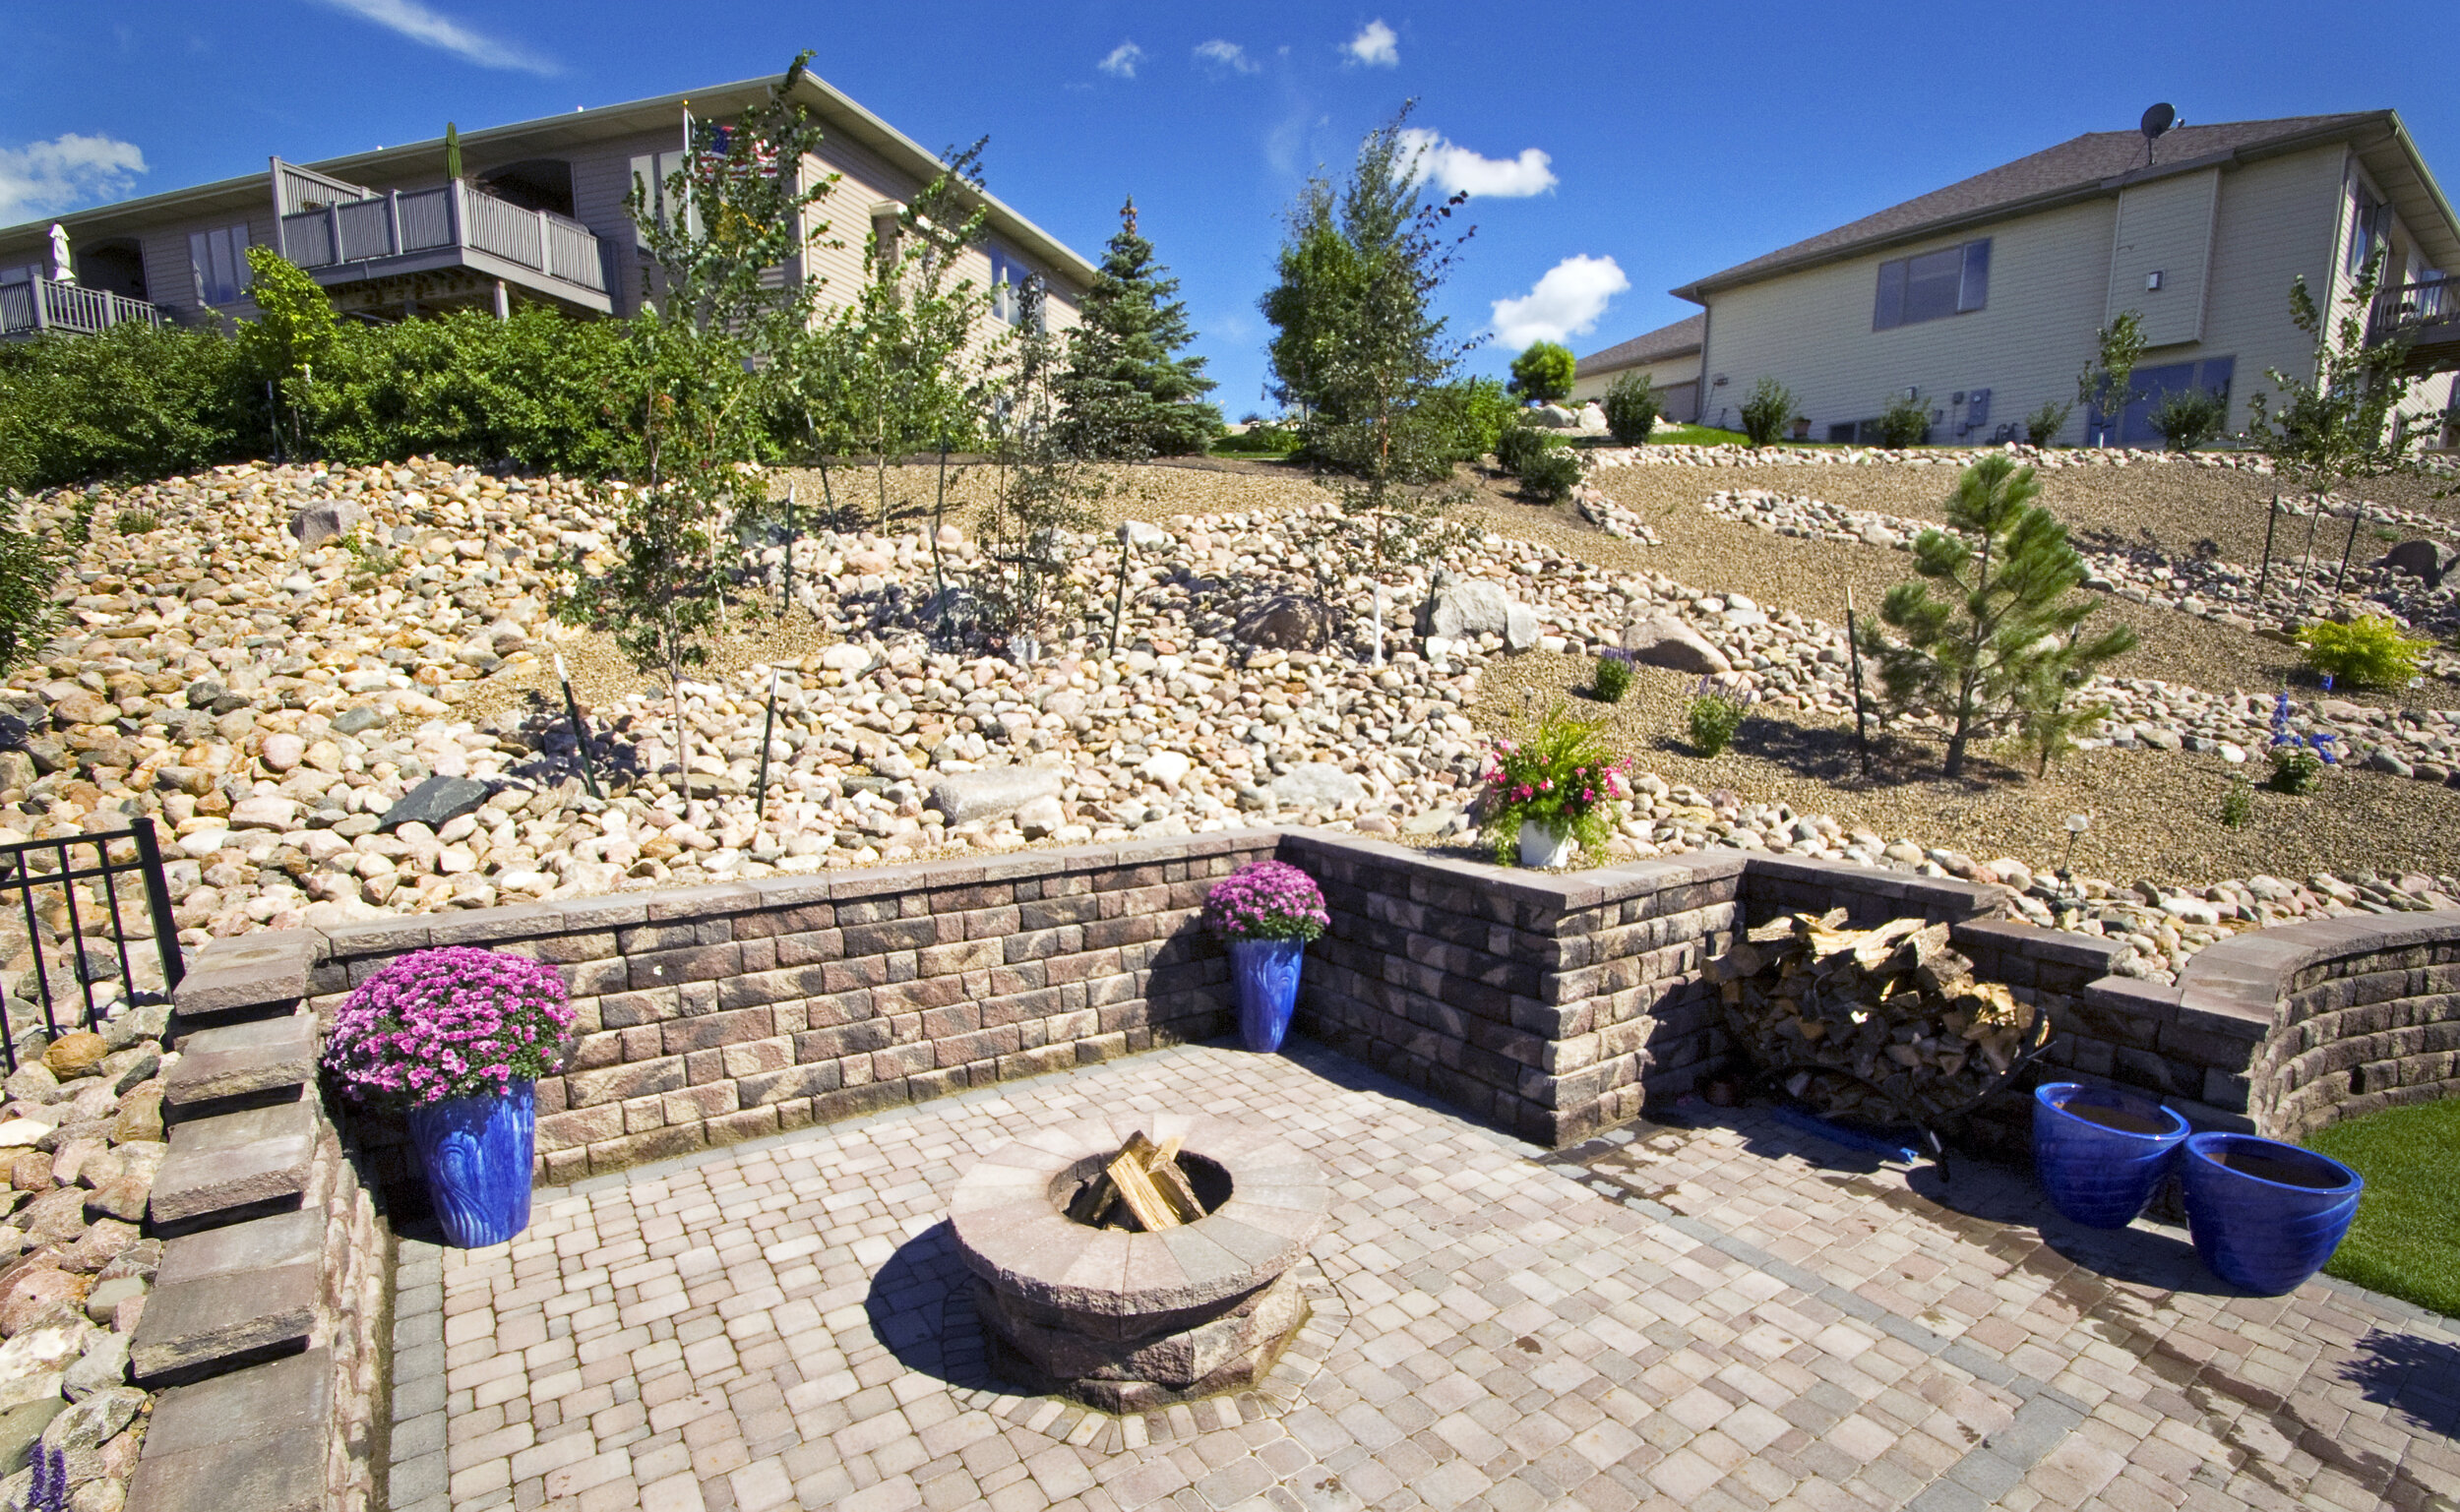 res block wall patio fire pit rock plant ALE_0309.jpg